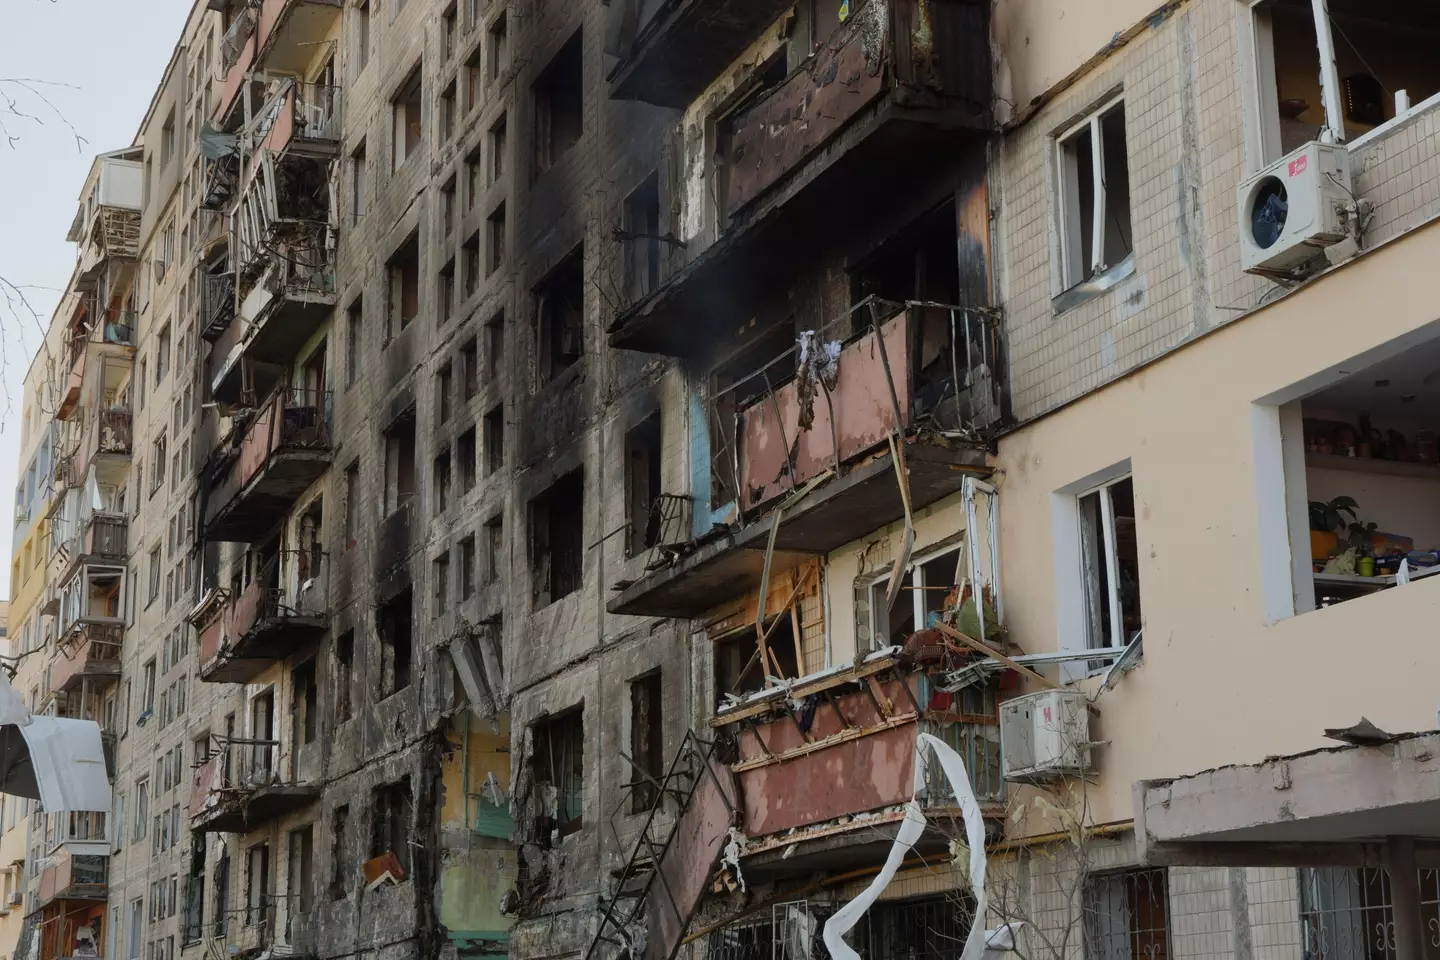 Housing blocks and hospitals in Ukraine have been targeted by Russian forces.